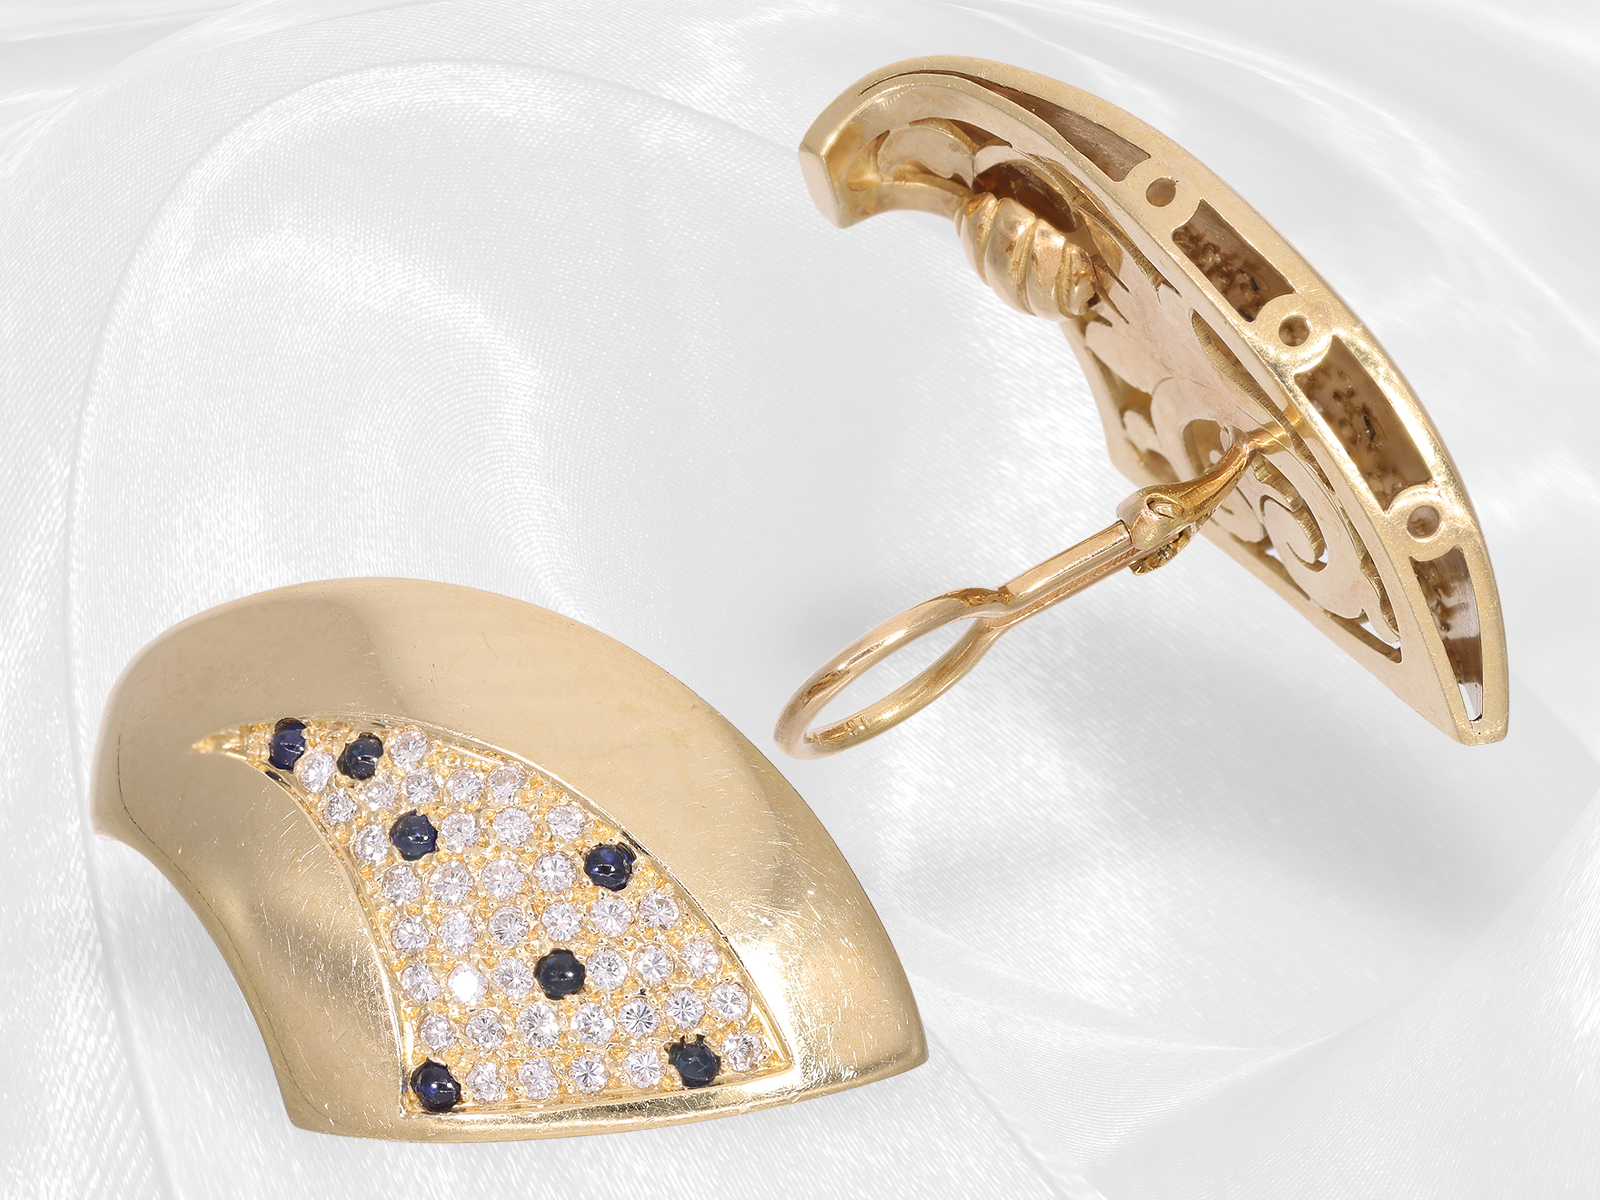 Earrings: rare and extremely decorative sapphire/brilliant designer goldsmith work, made in 18K gold - Image 3 of 5